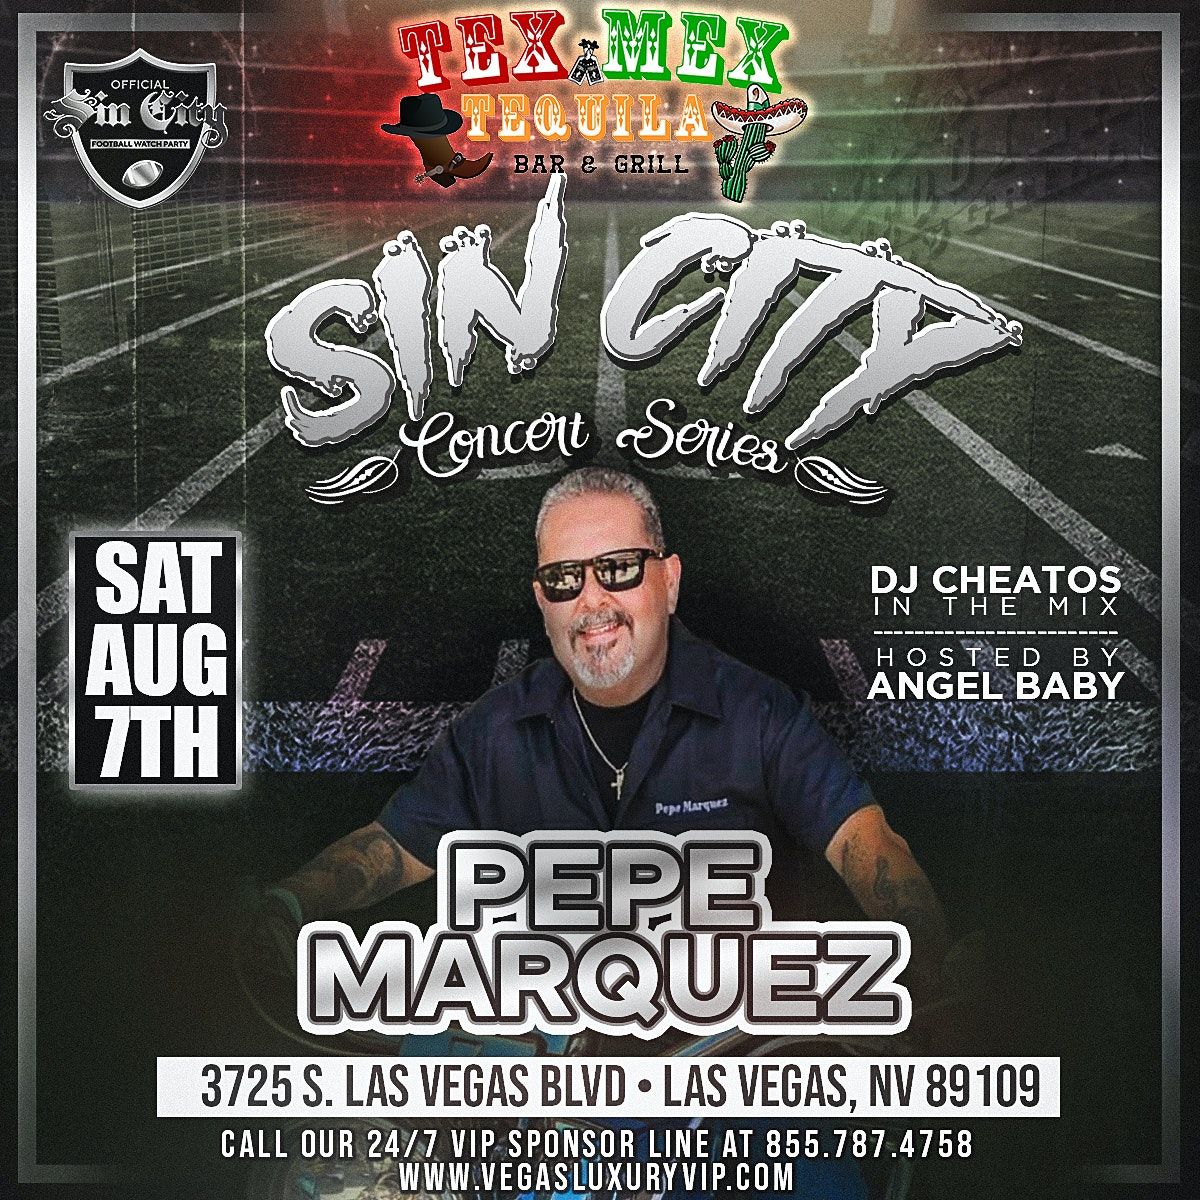 Sin City Concert Series With Pepe Marquez